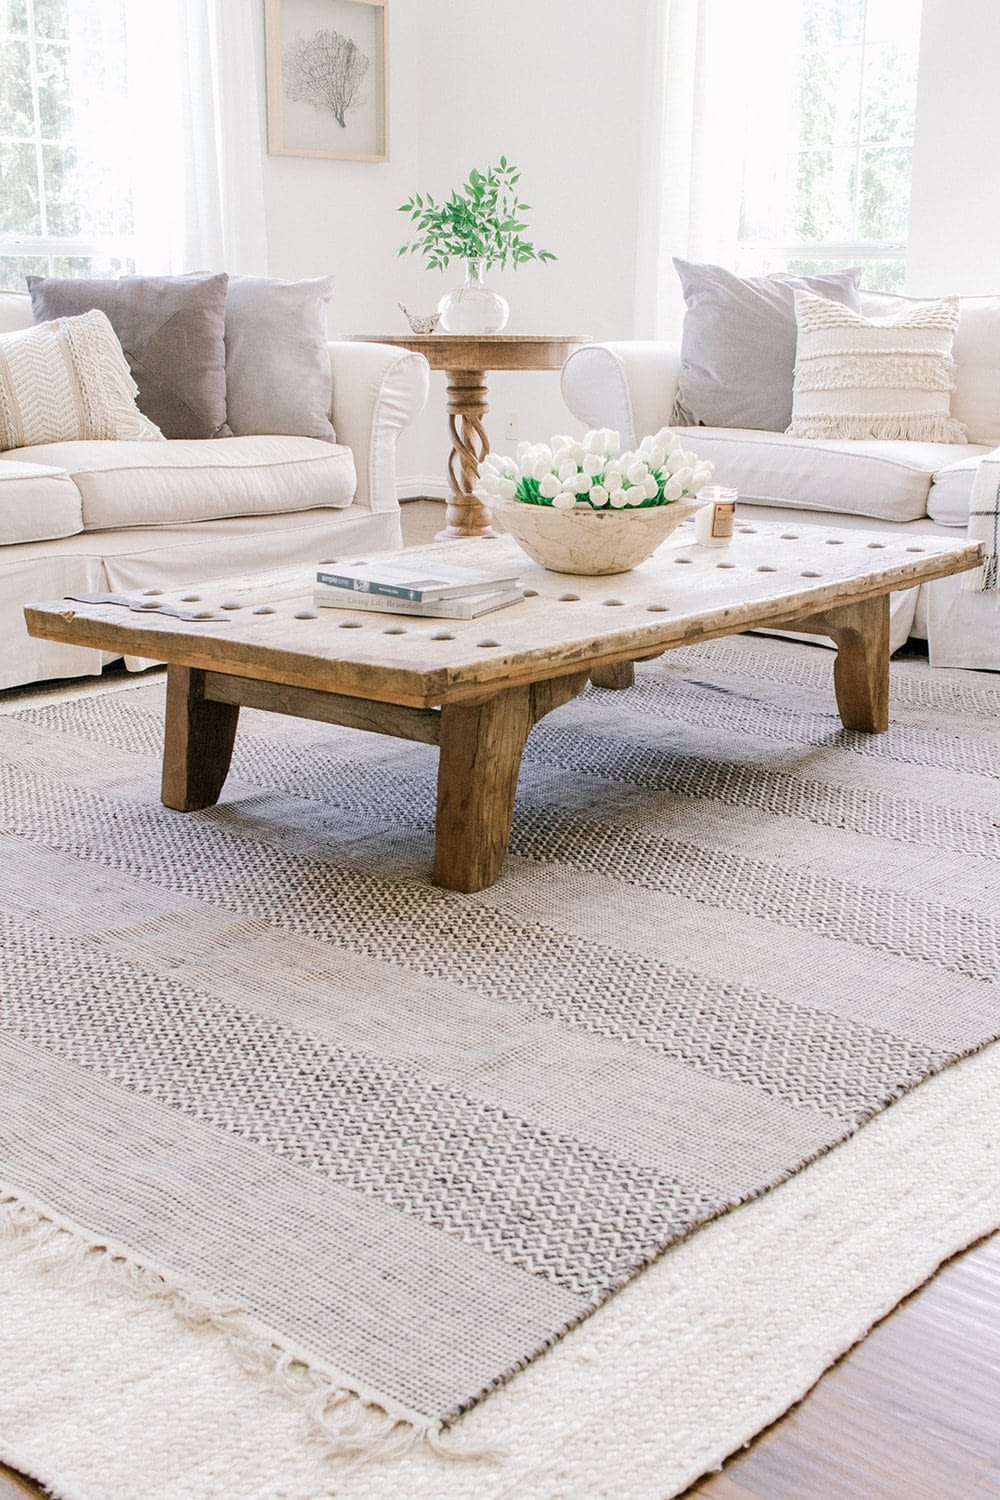 living room with layered rugs